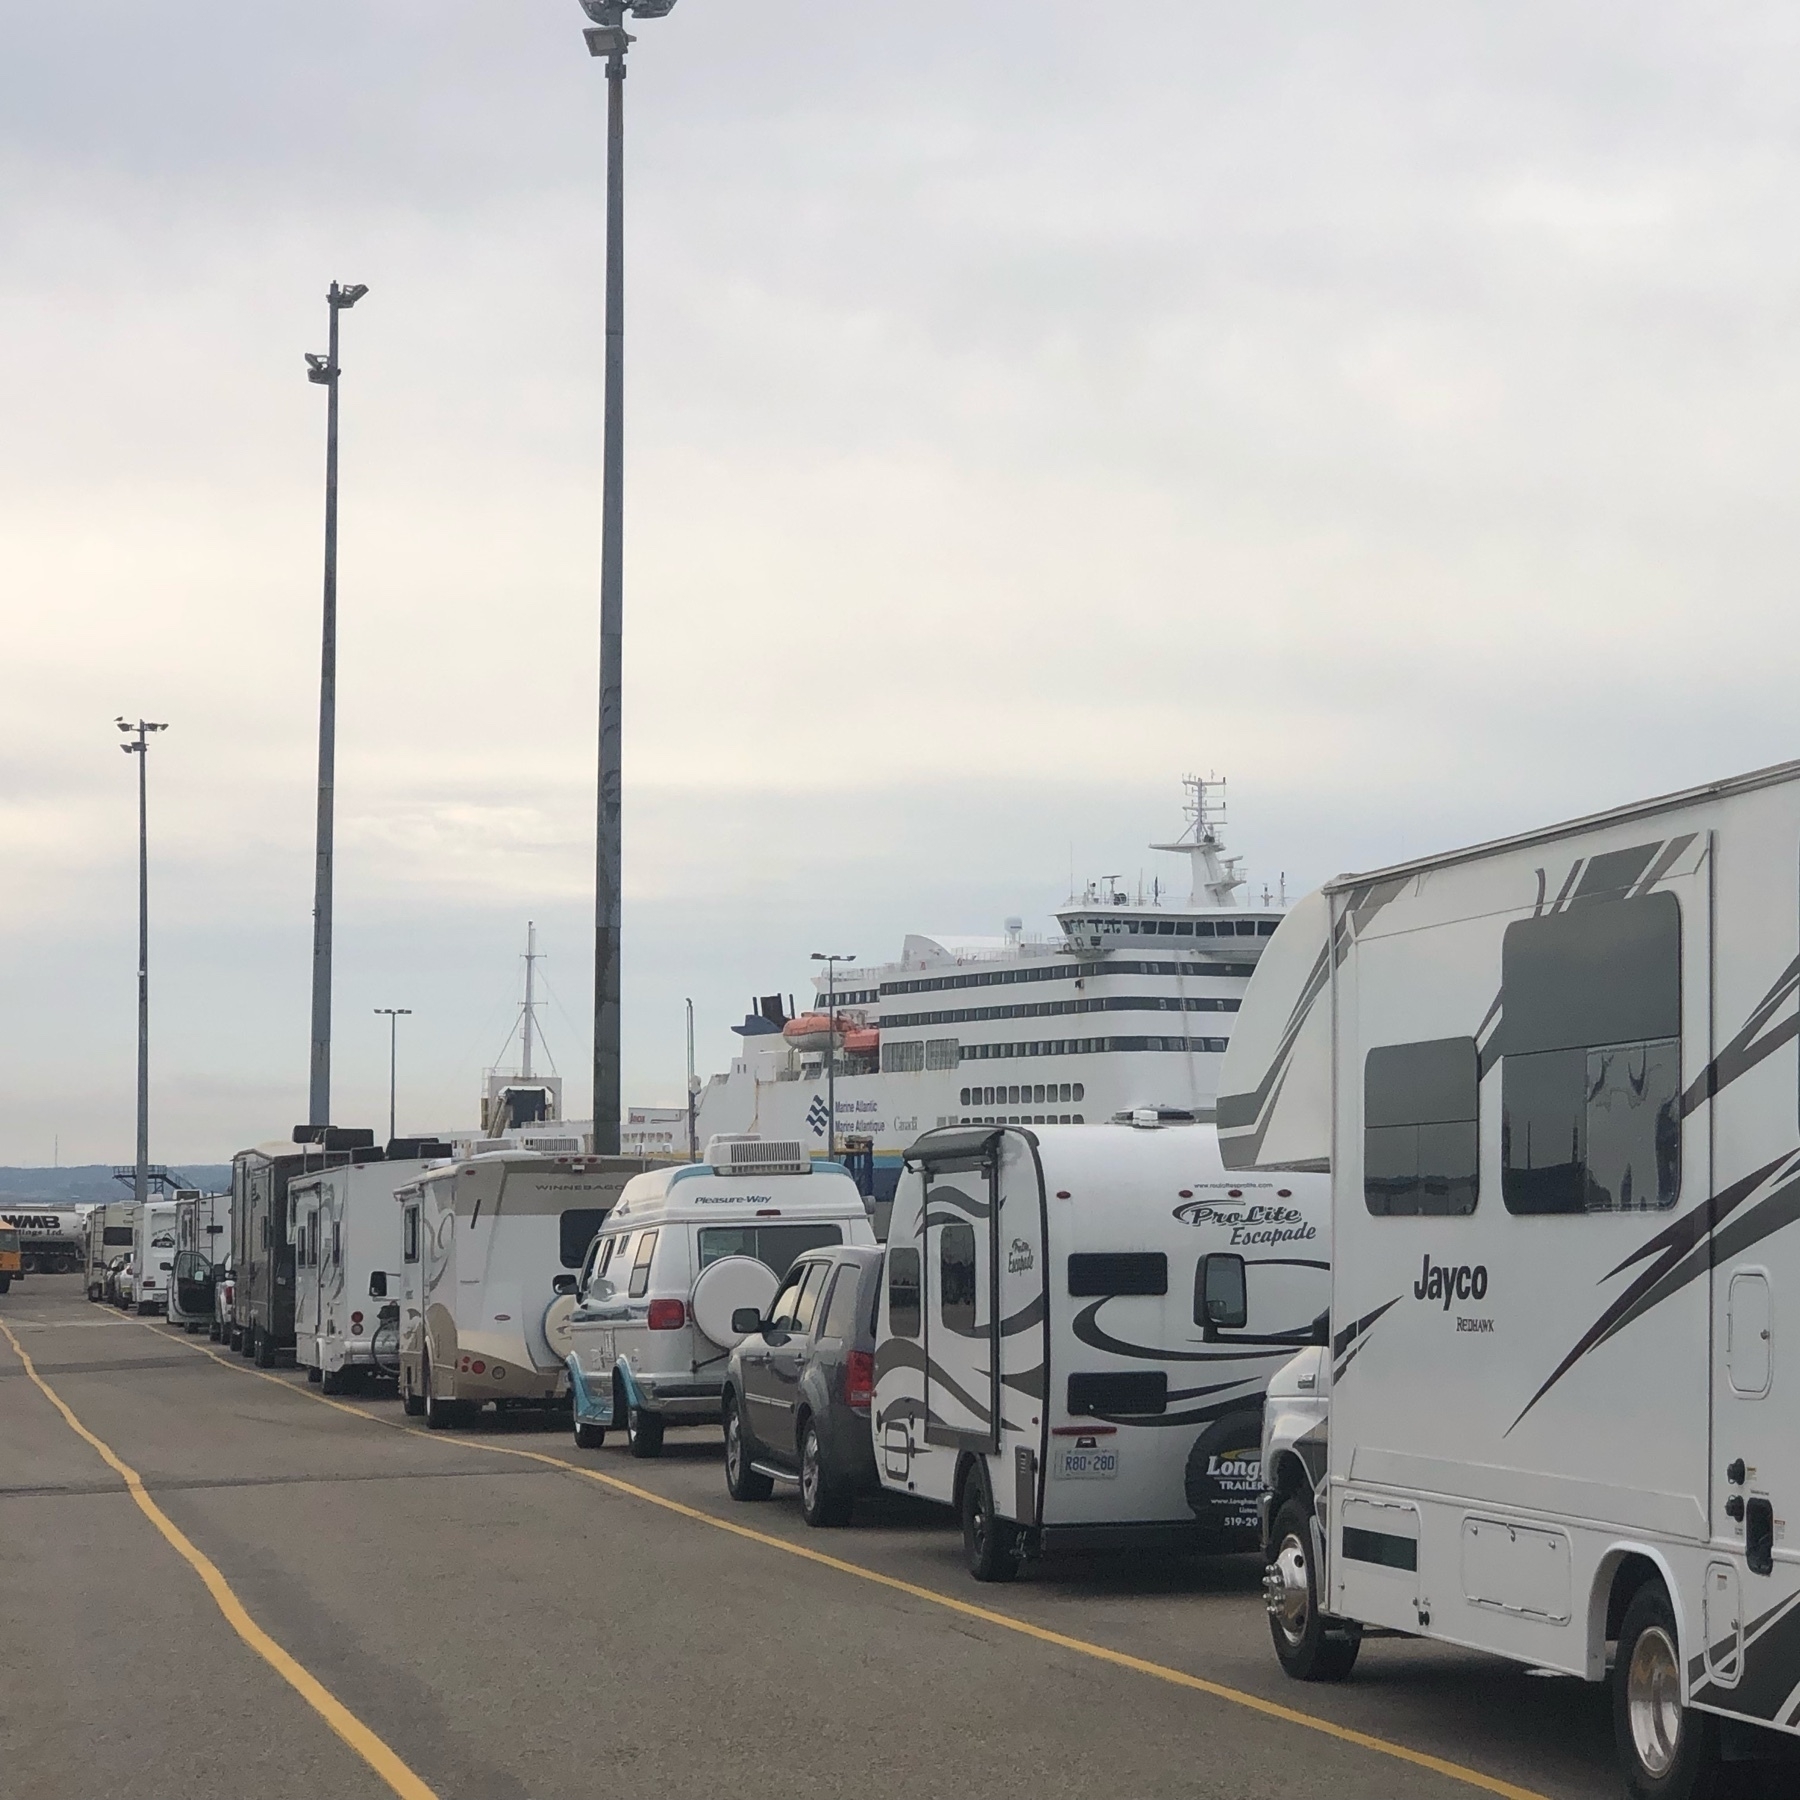 row of recreation vehicles. there is a ferry in the background